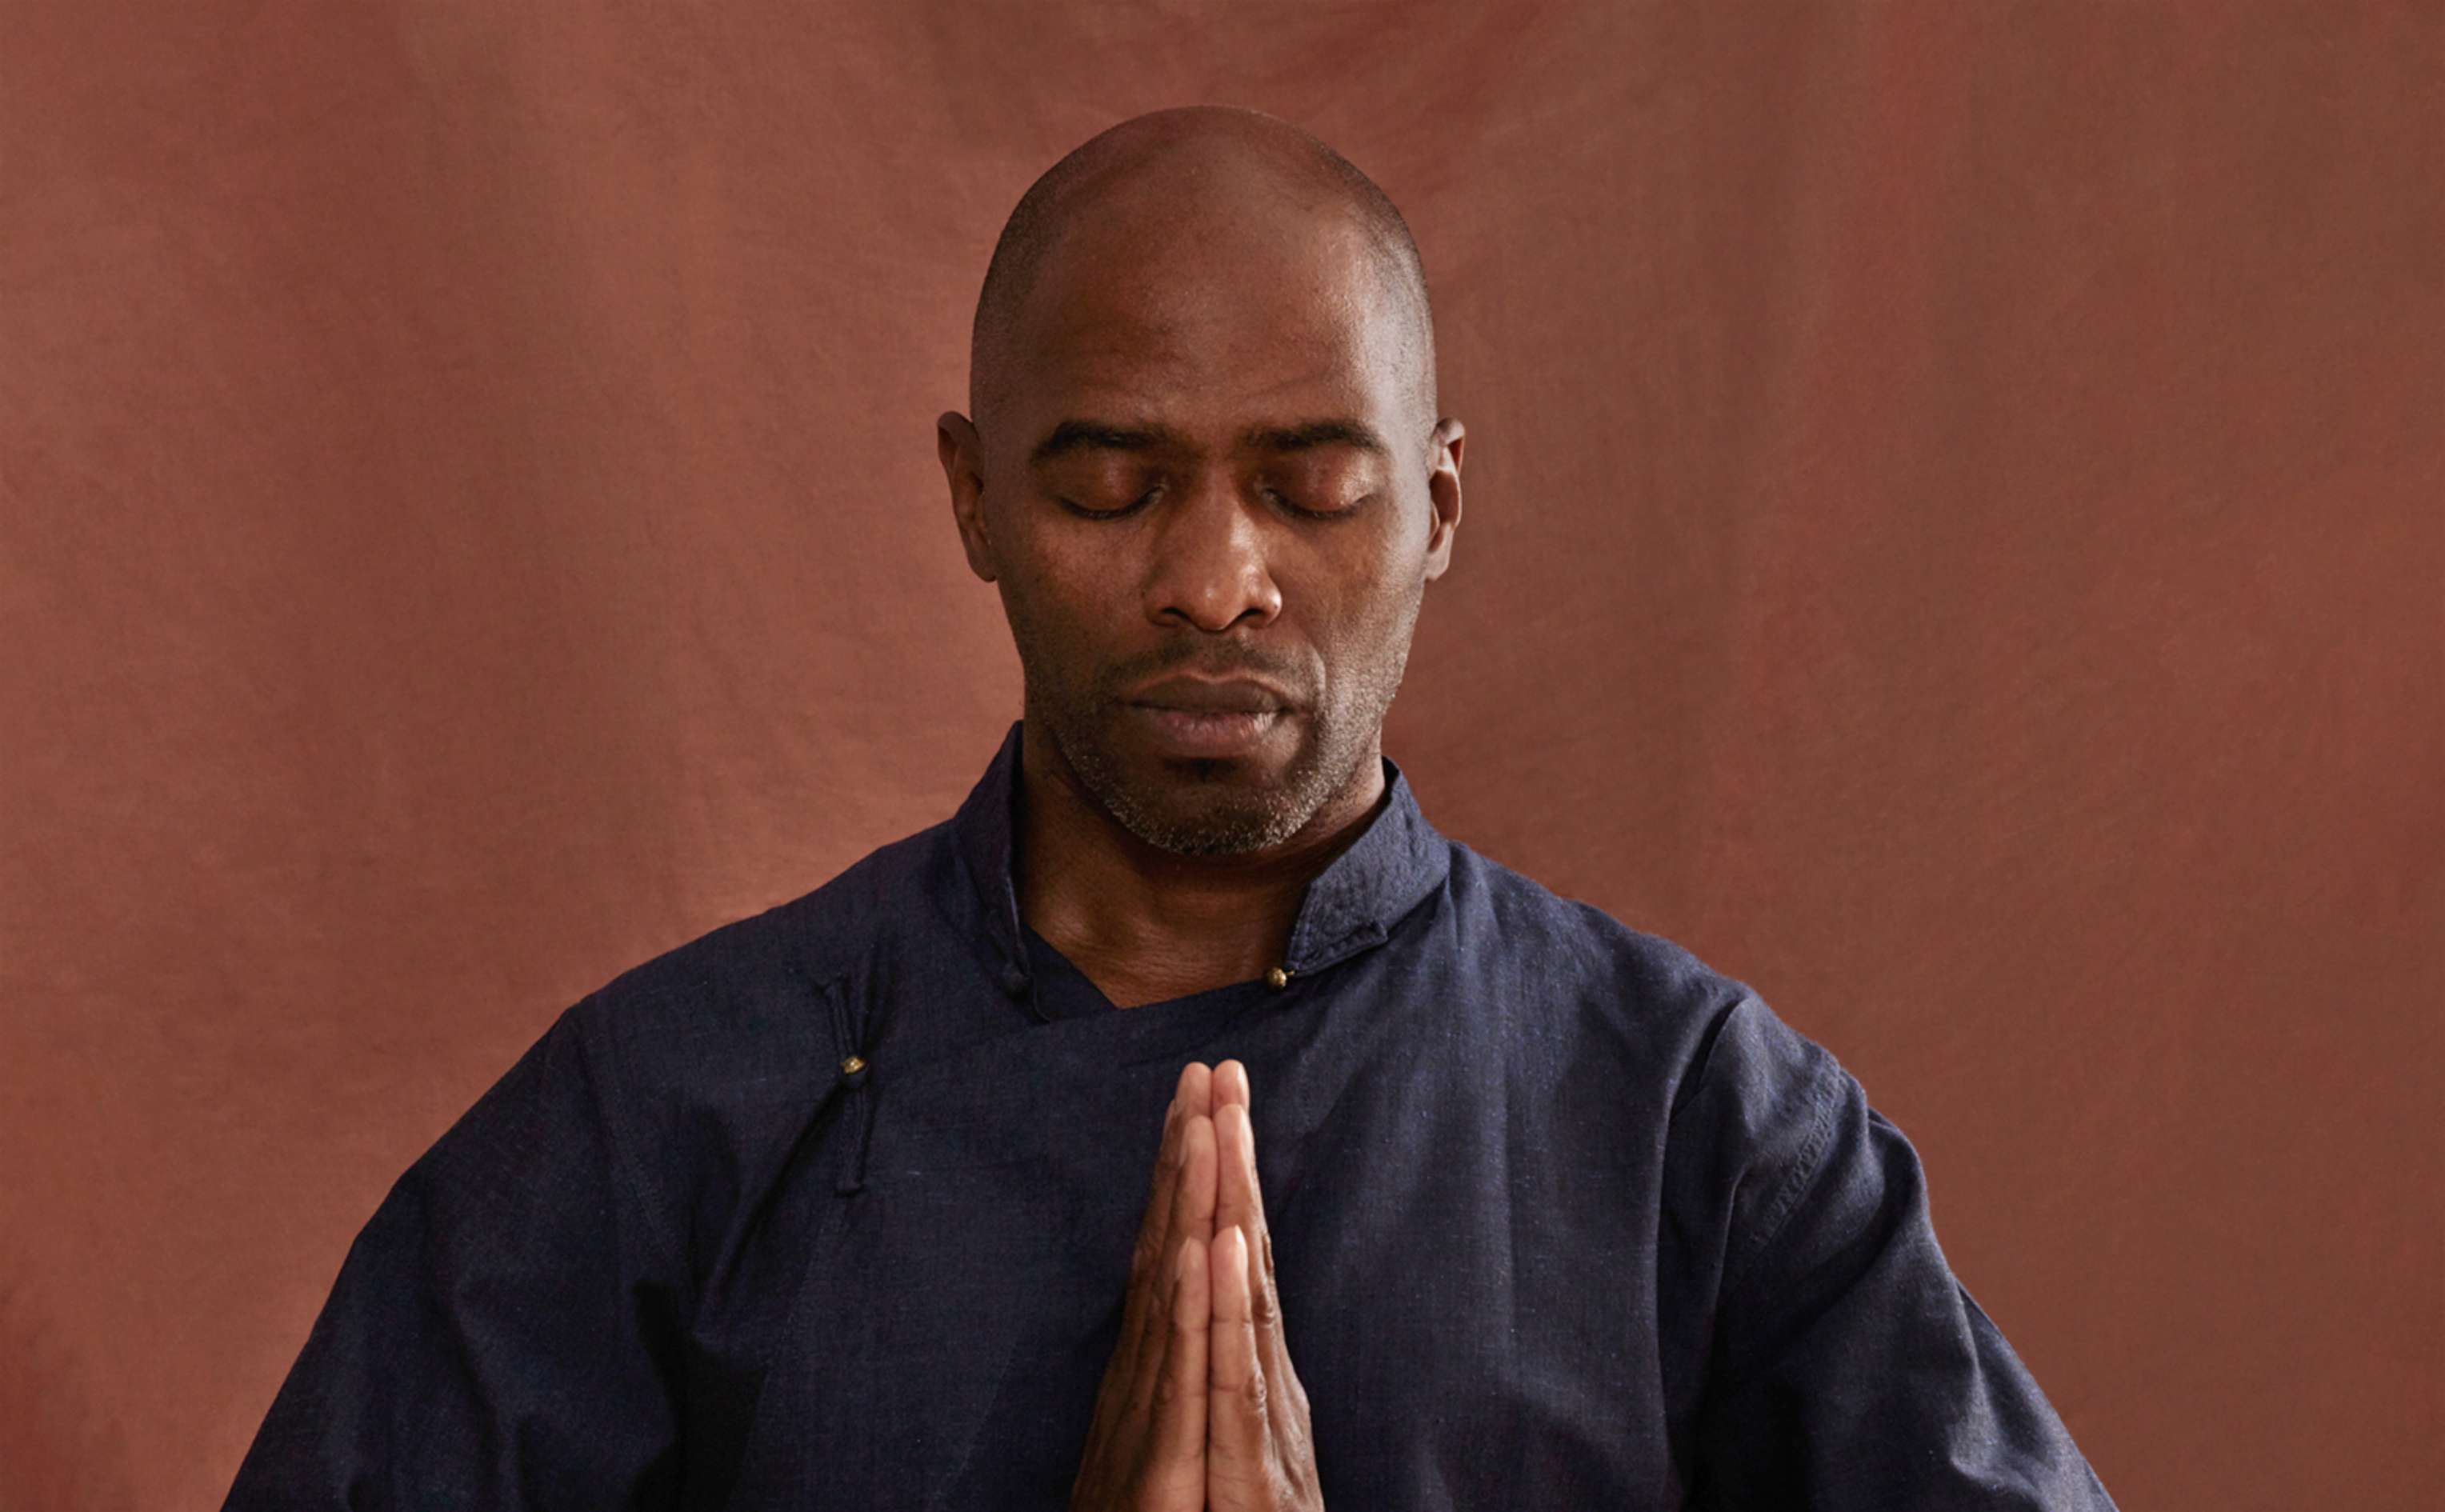 A man with eyes closed in a contemplative state, presses his palms together in front of his chest in a prayerful salutation.